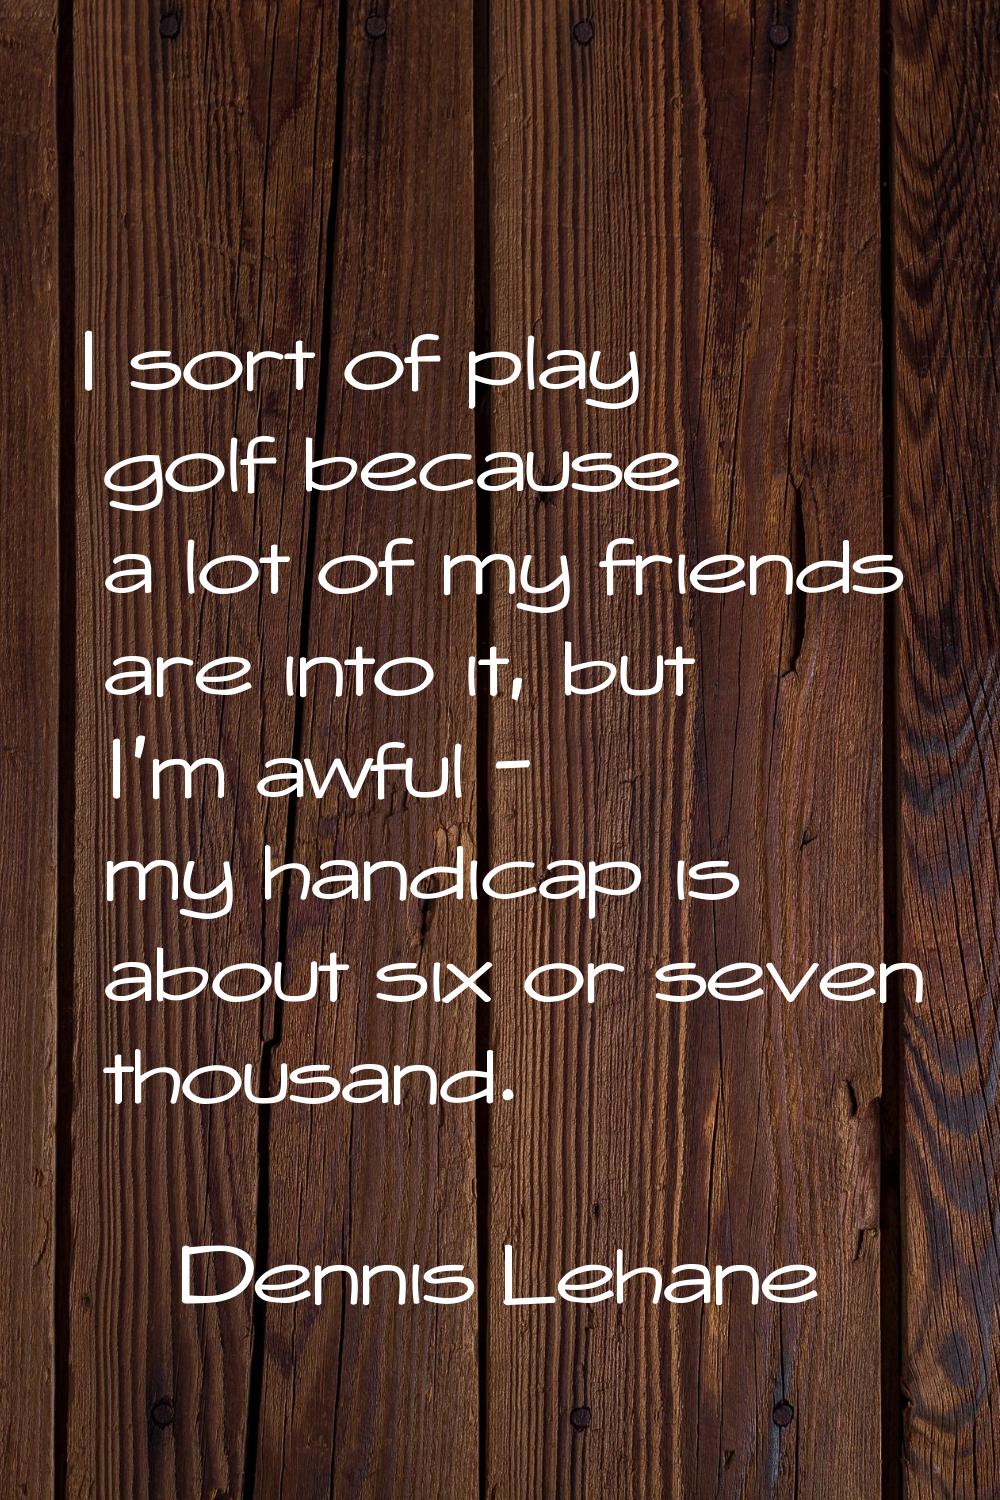 I sort of play golf because a lot of my friends are into it, but I'm awful - my handicap is about s